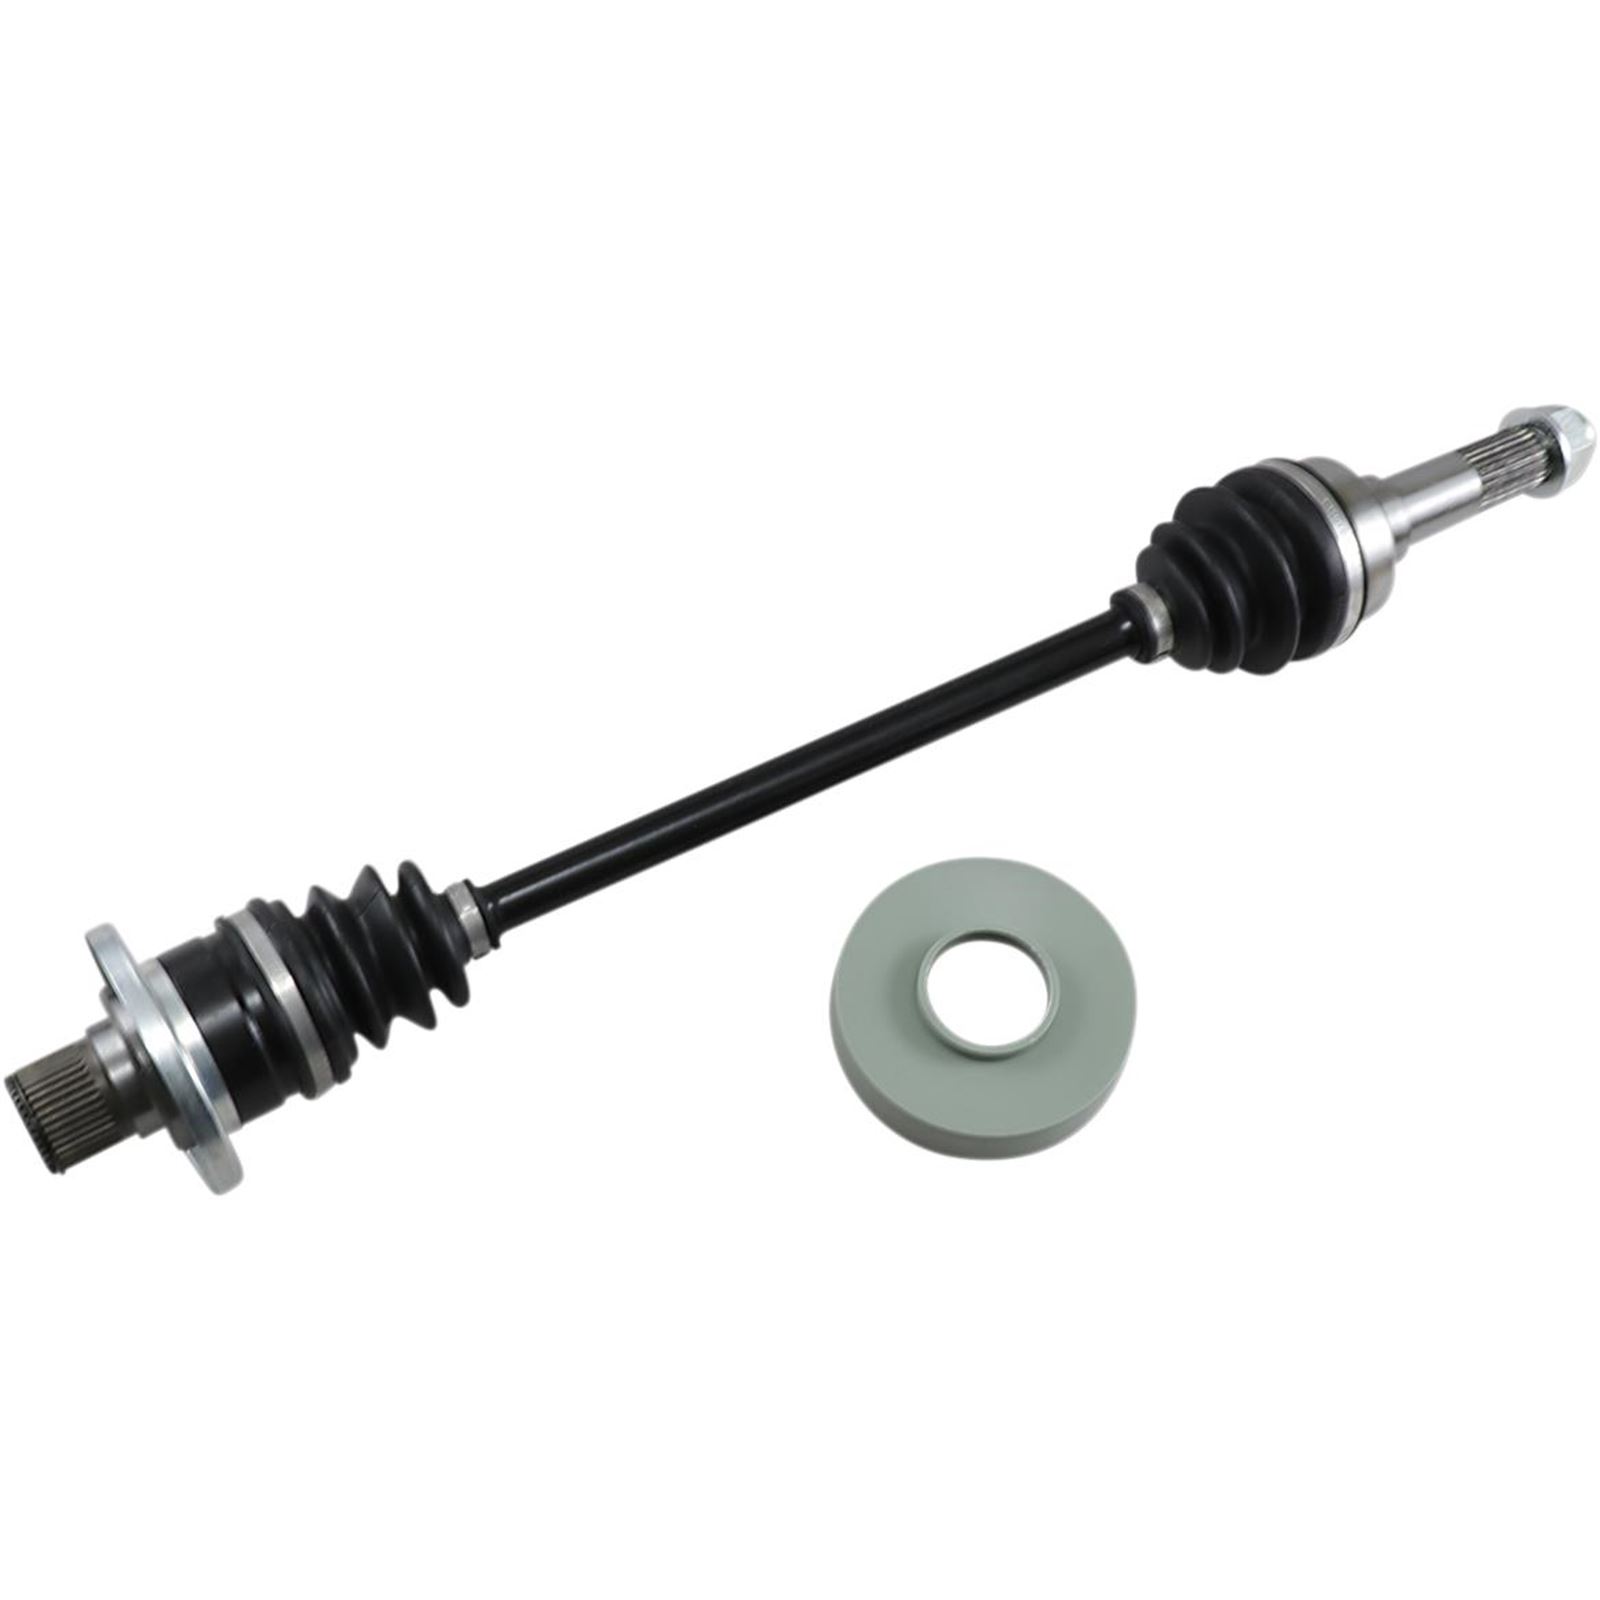 Moose Racing Complete Axle Kit - Rear Right for Yamaha